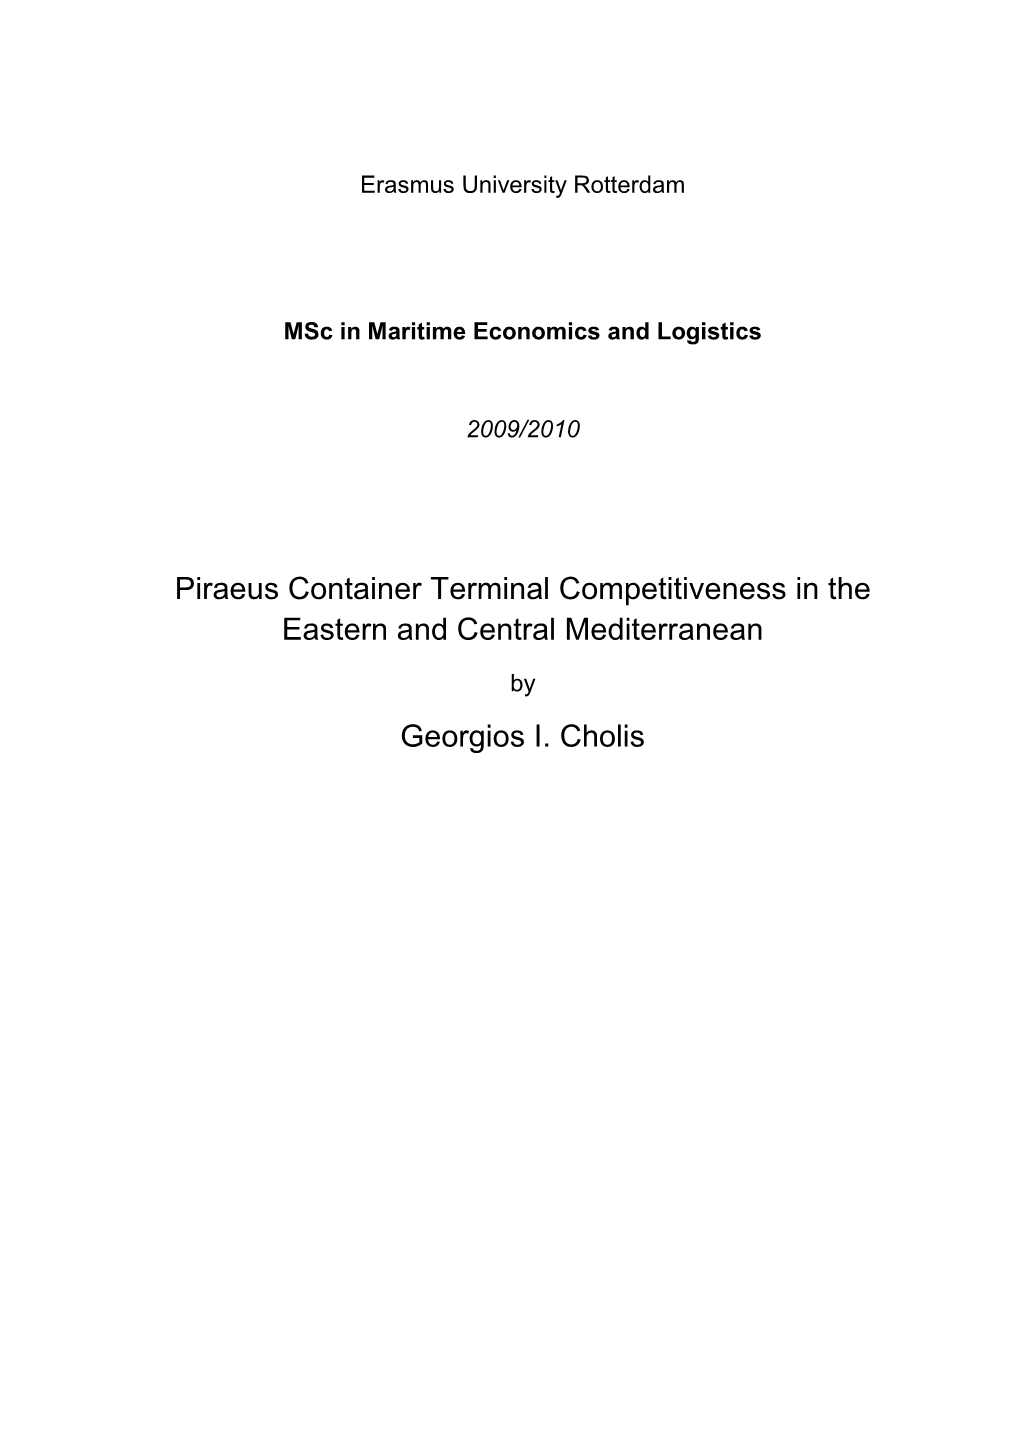 Piraeus Container Terminal Competitiveness in the Eastern and Central Mediterranean